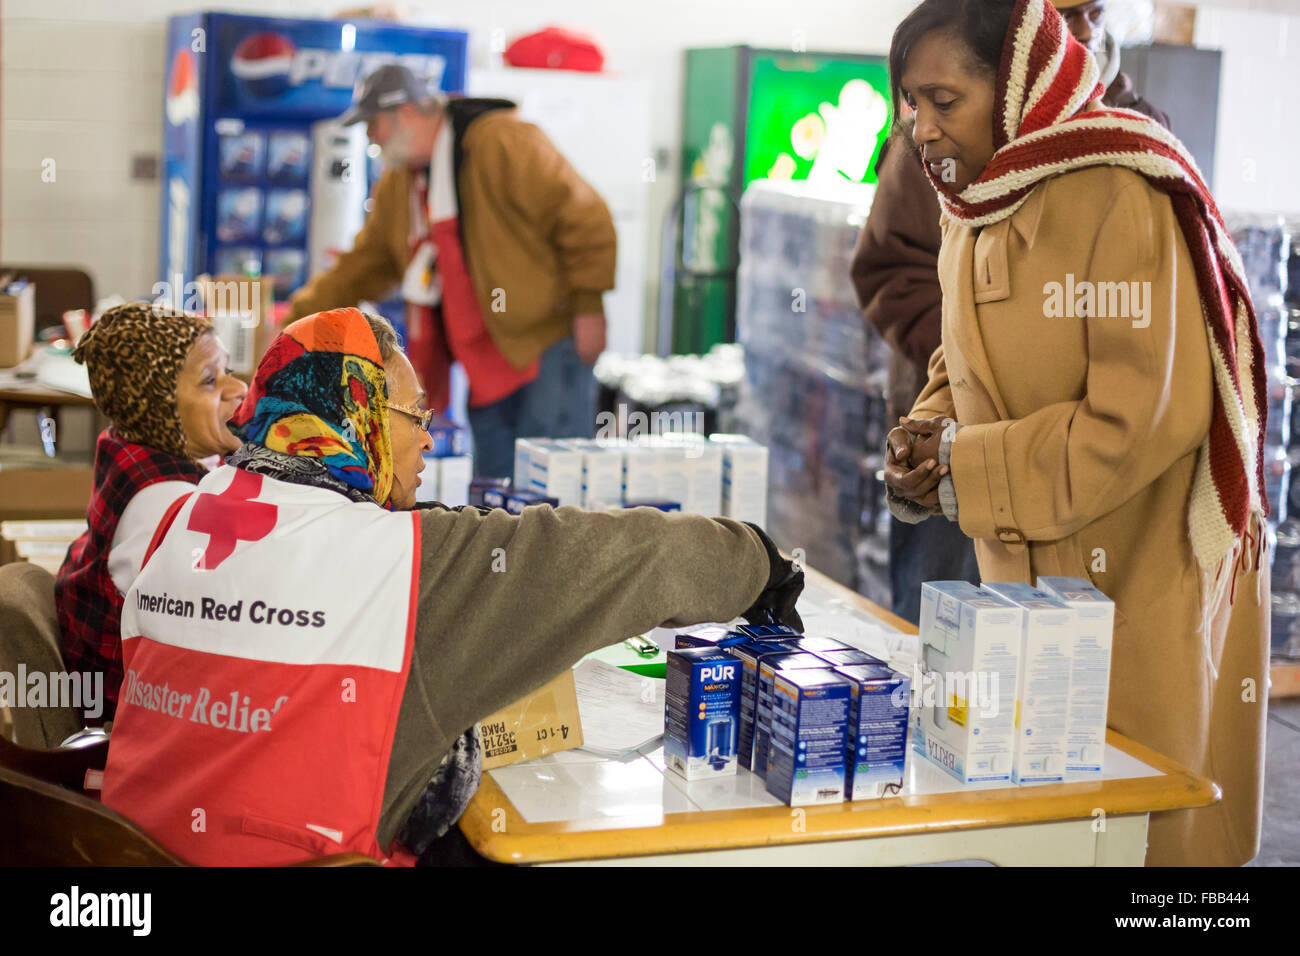 Flint, Michigan USA - 13th January 2016 - Residents pick up bottled water and water filters from Red Cross disaster relief volunteers at Fire Station #6. Water and filters were distributed after cost-cutting by state officials led to high lead levels in the city's water supply. Credit:  Jim West/Alamy Live News Stock Photo